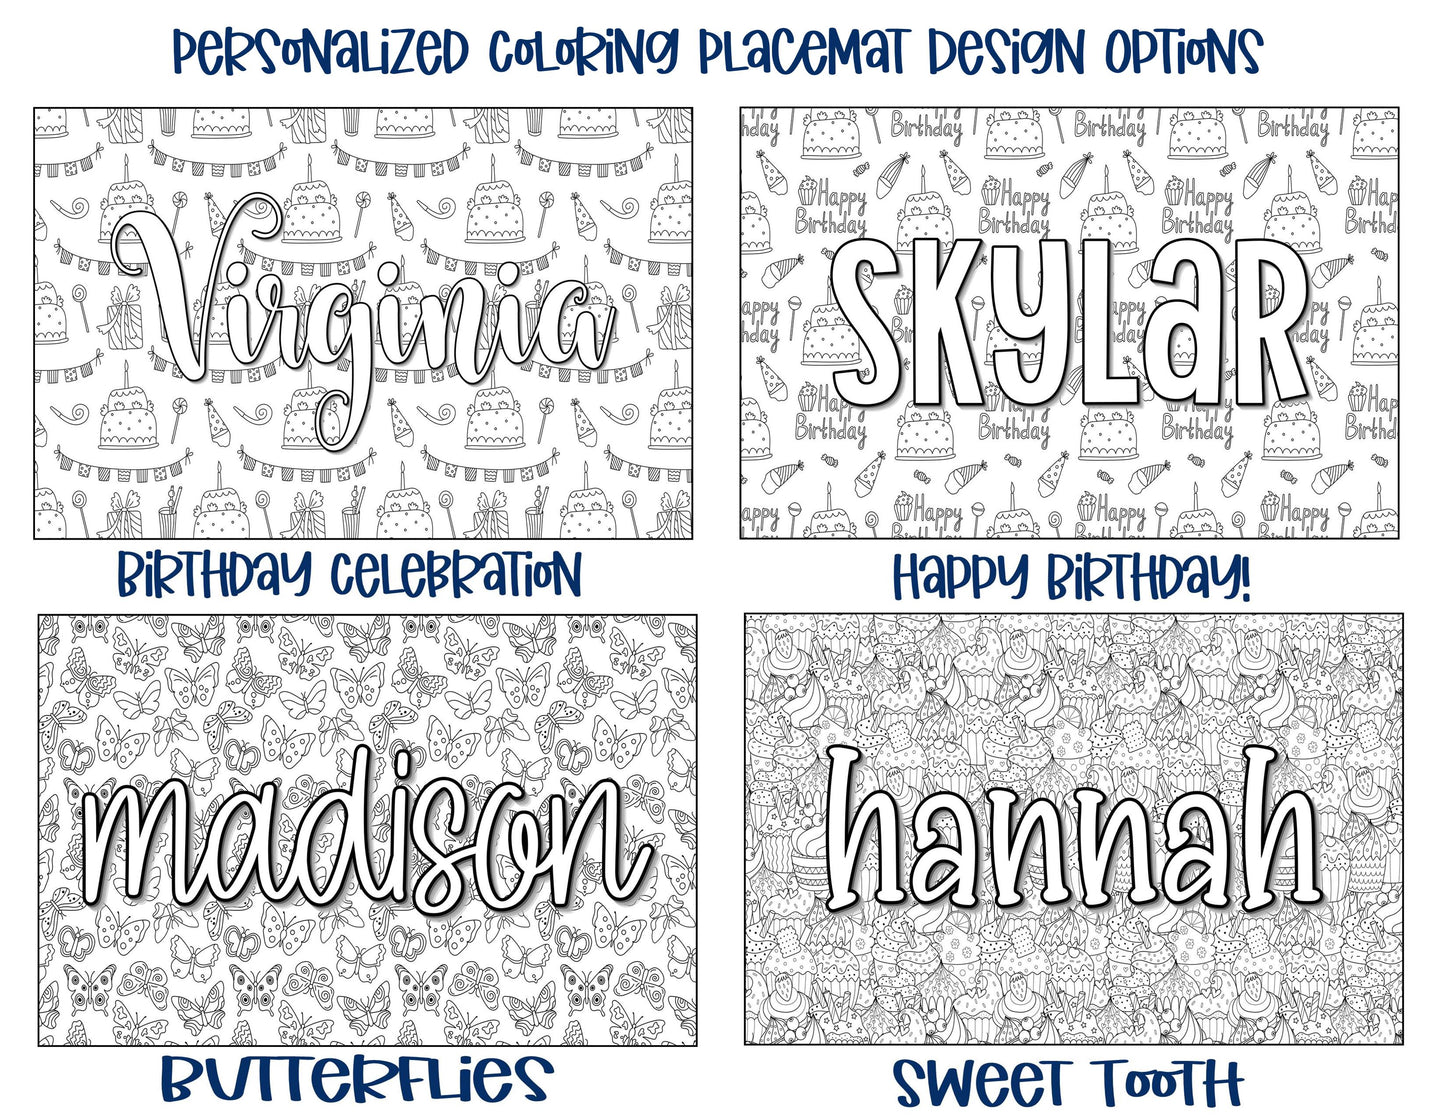 Personalized Coloring Name Placemat - Crazy Cats